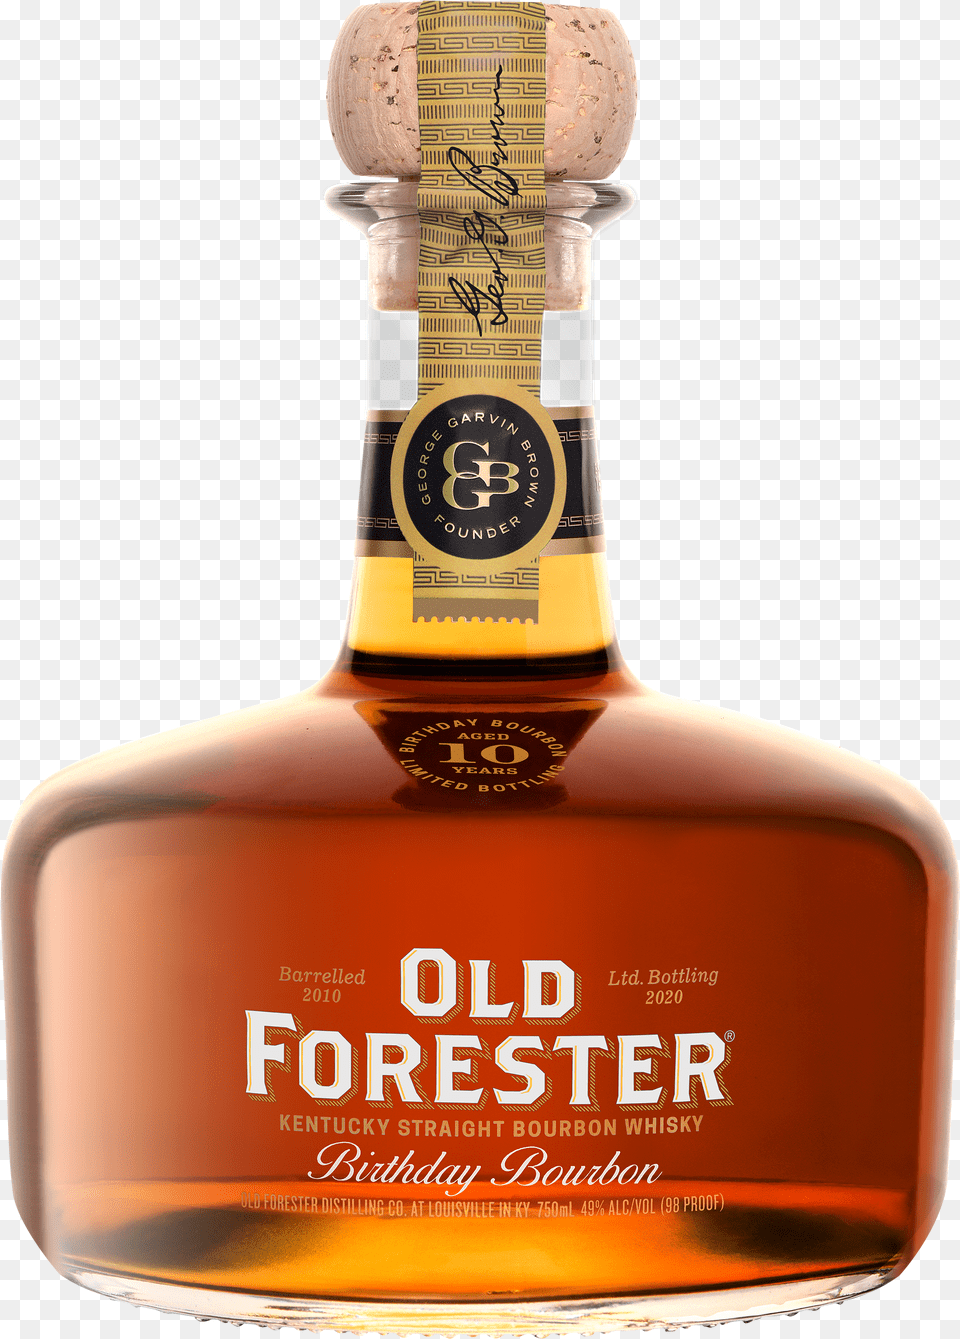 Old Forester 2020 Birthday Bourbon Whisky Old Forester Birthday Bourbon Free Png Download